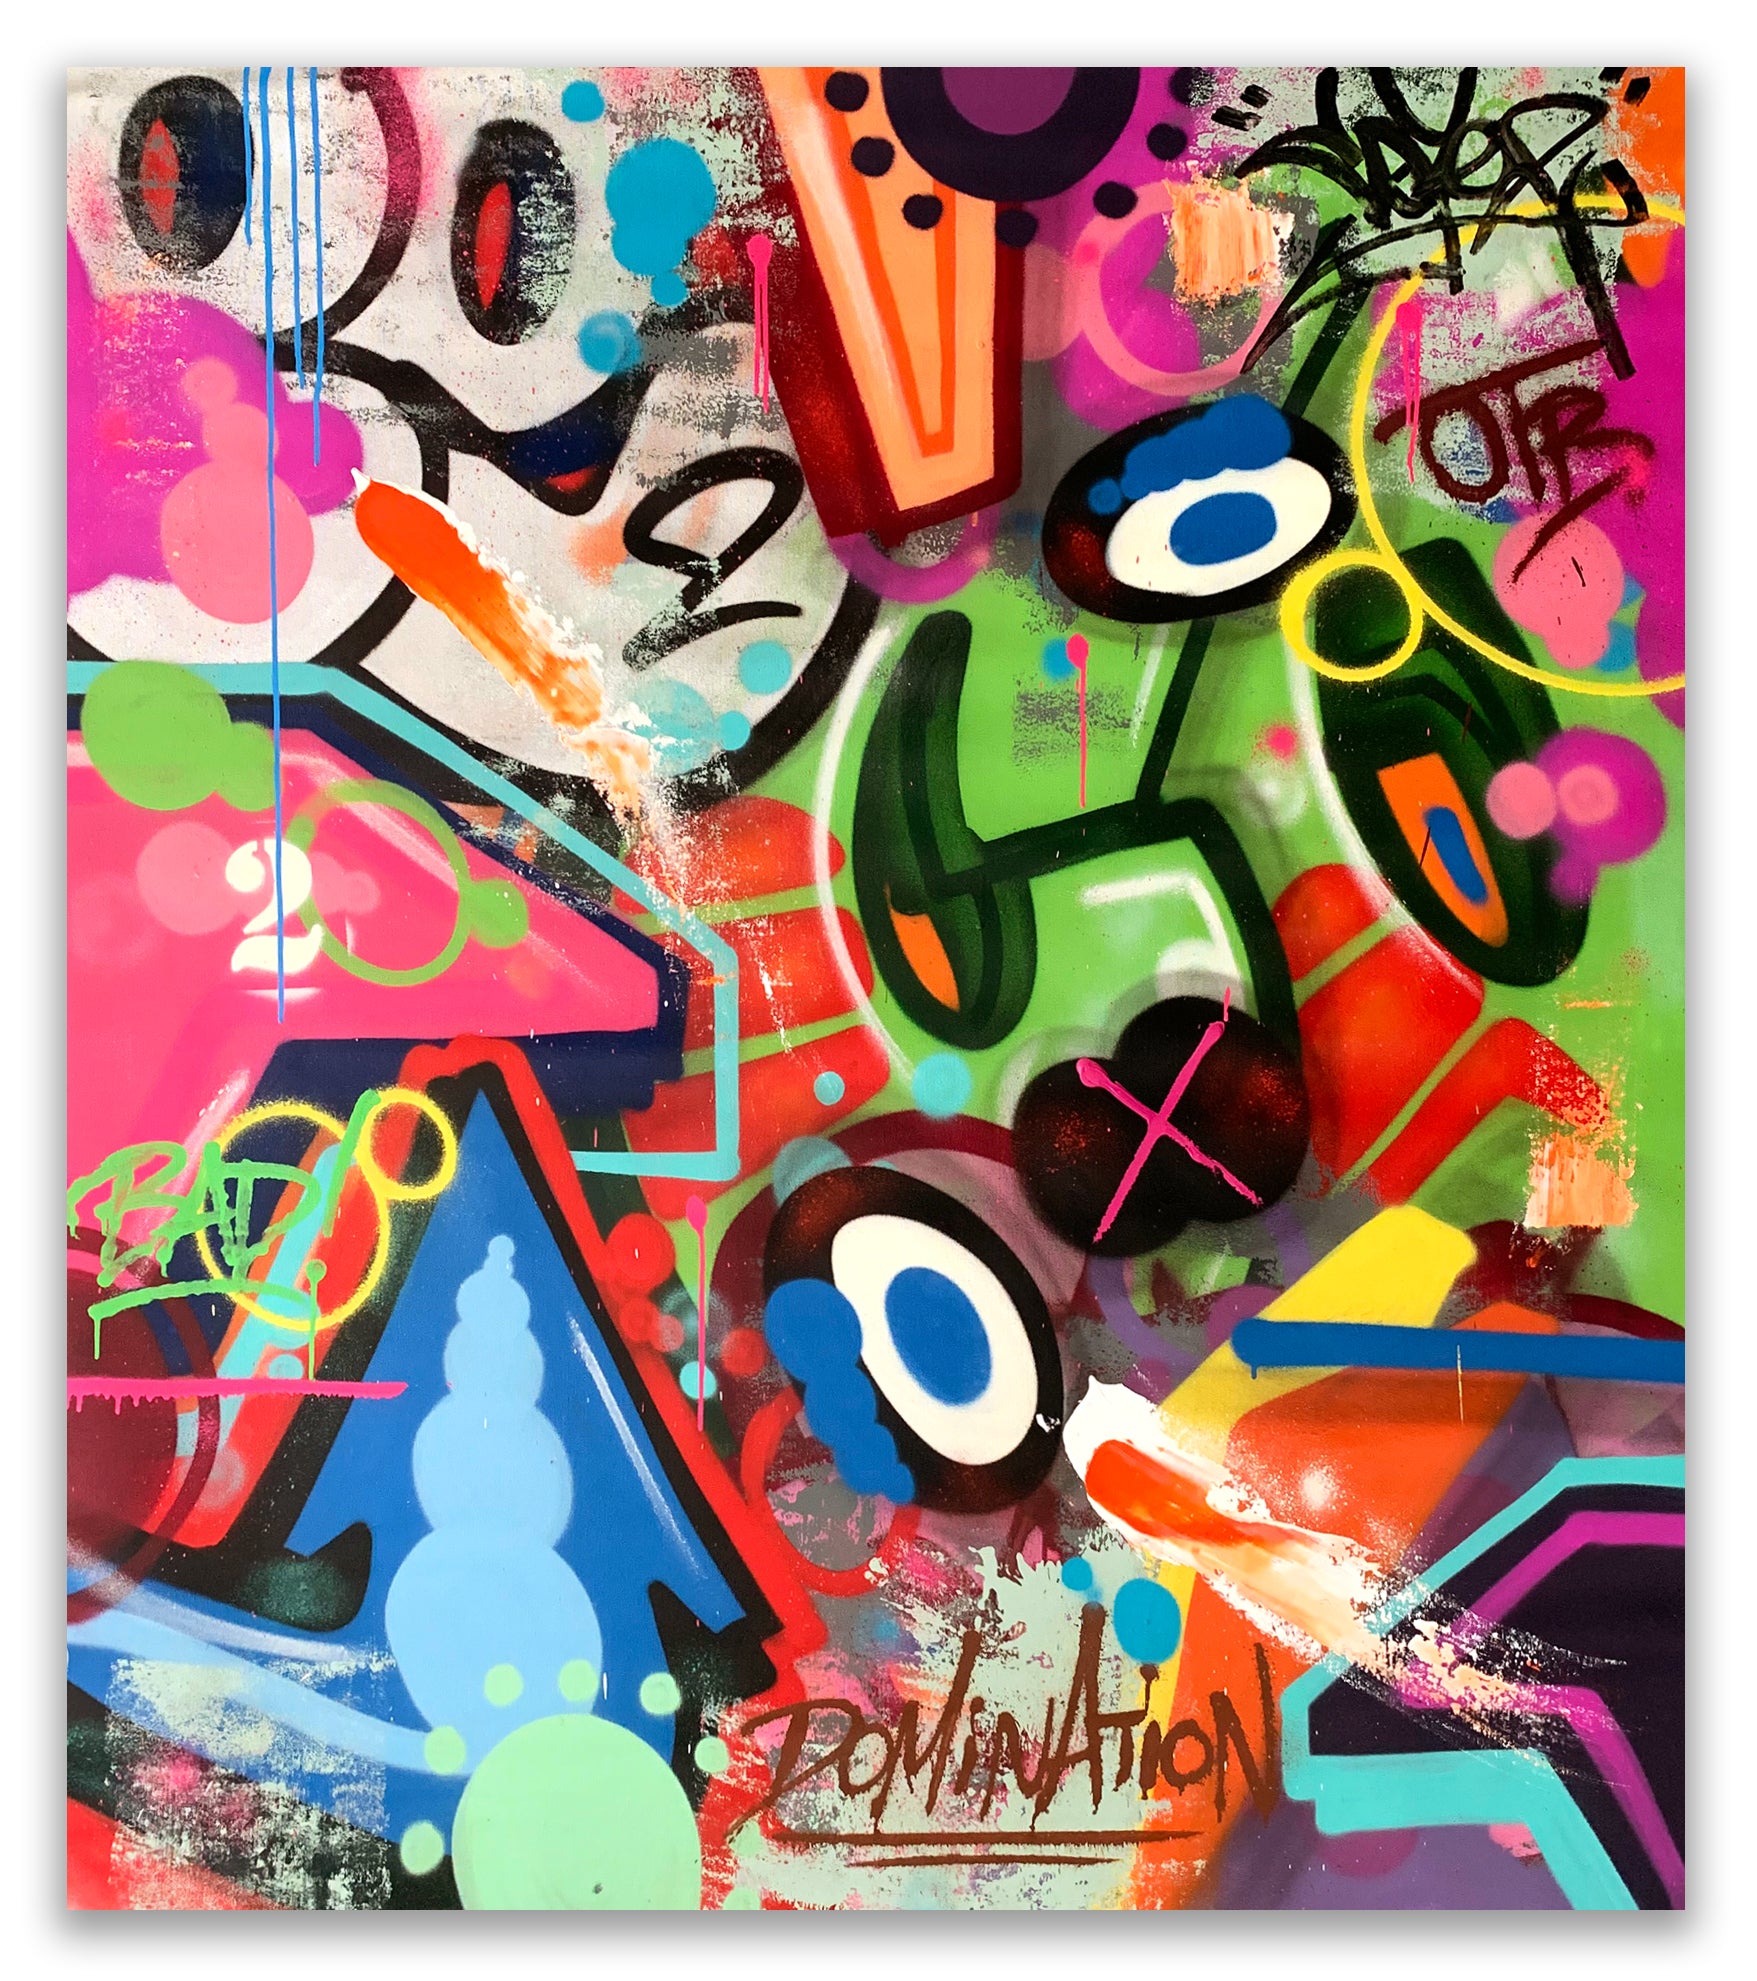 COPE2 "Domination" 50"x60" Painting